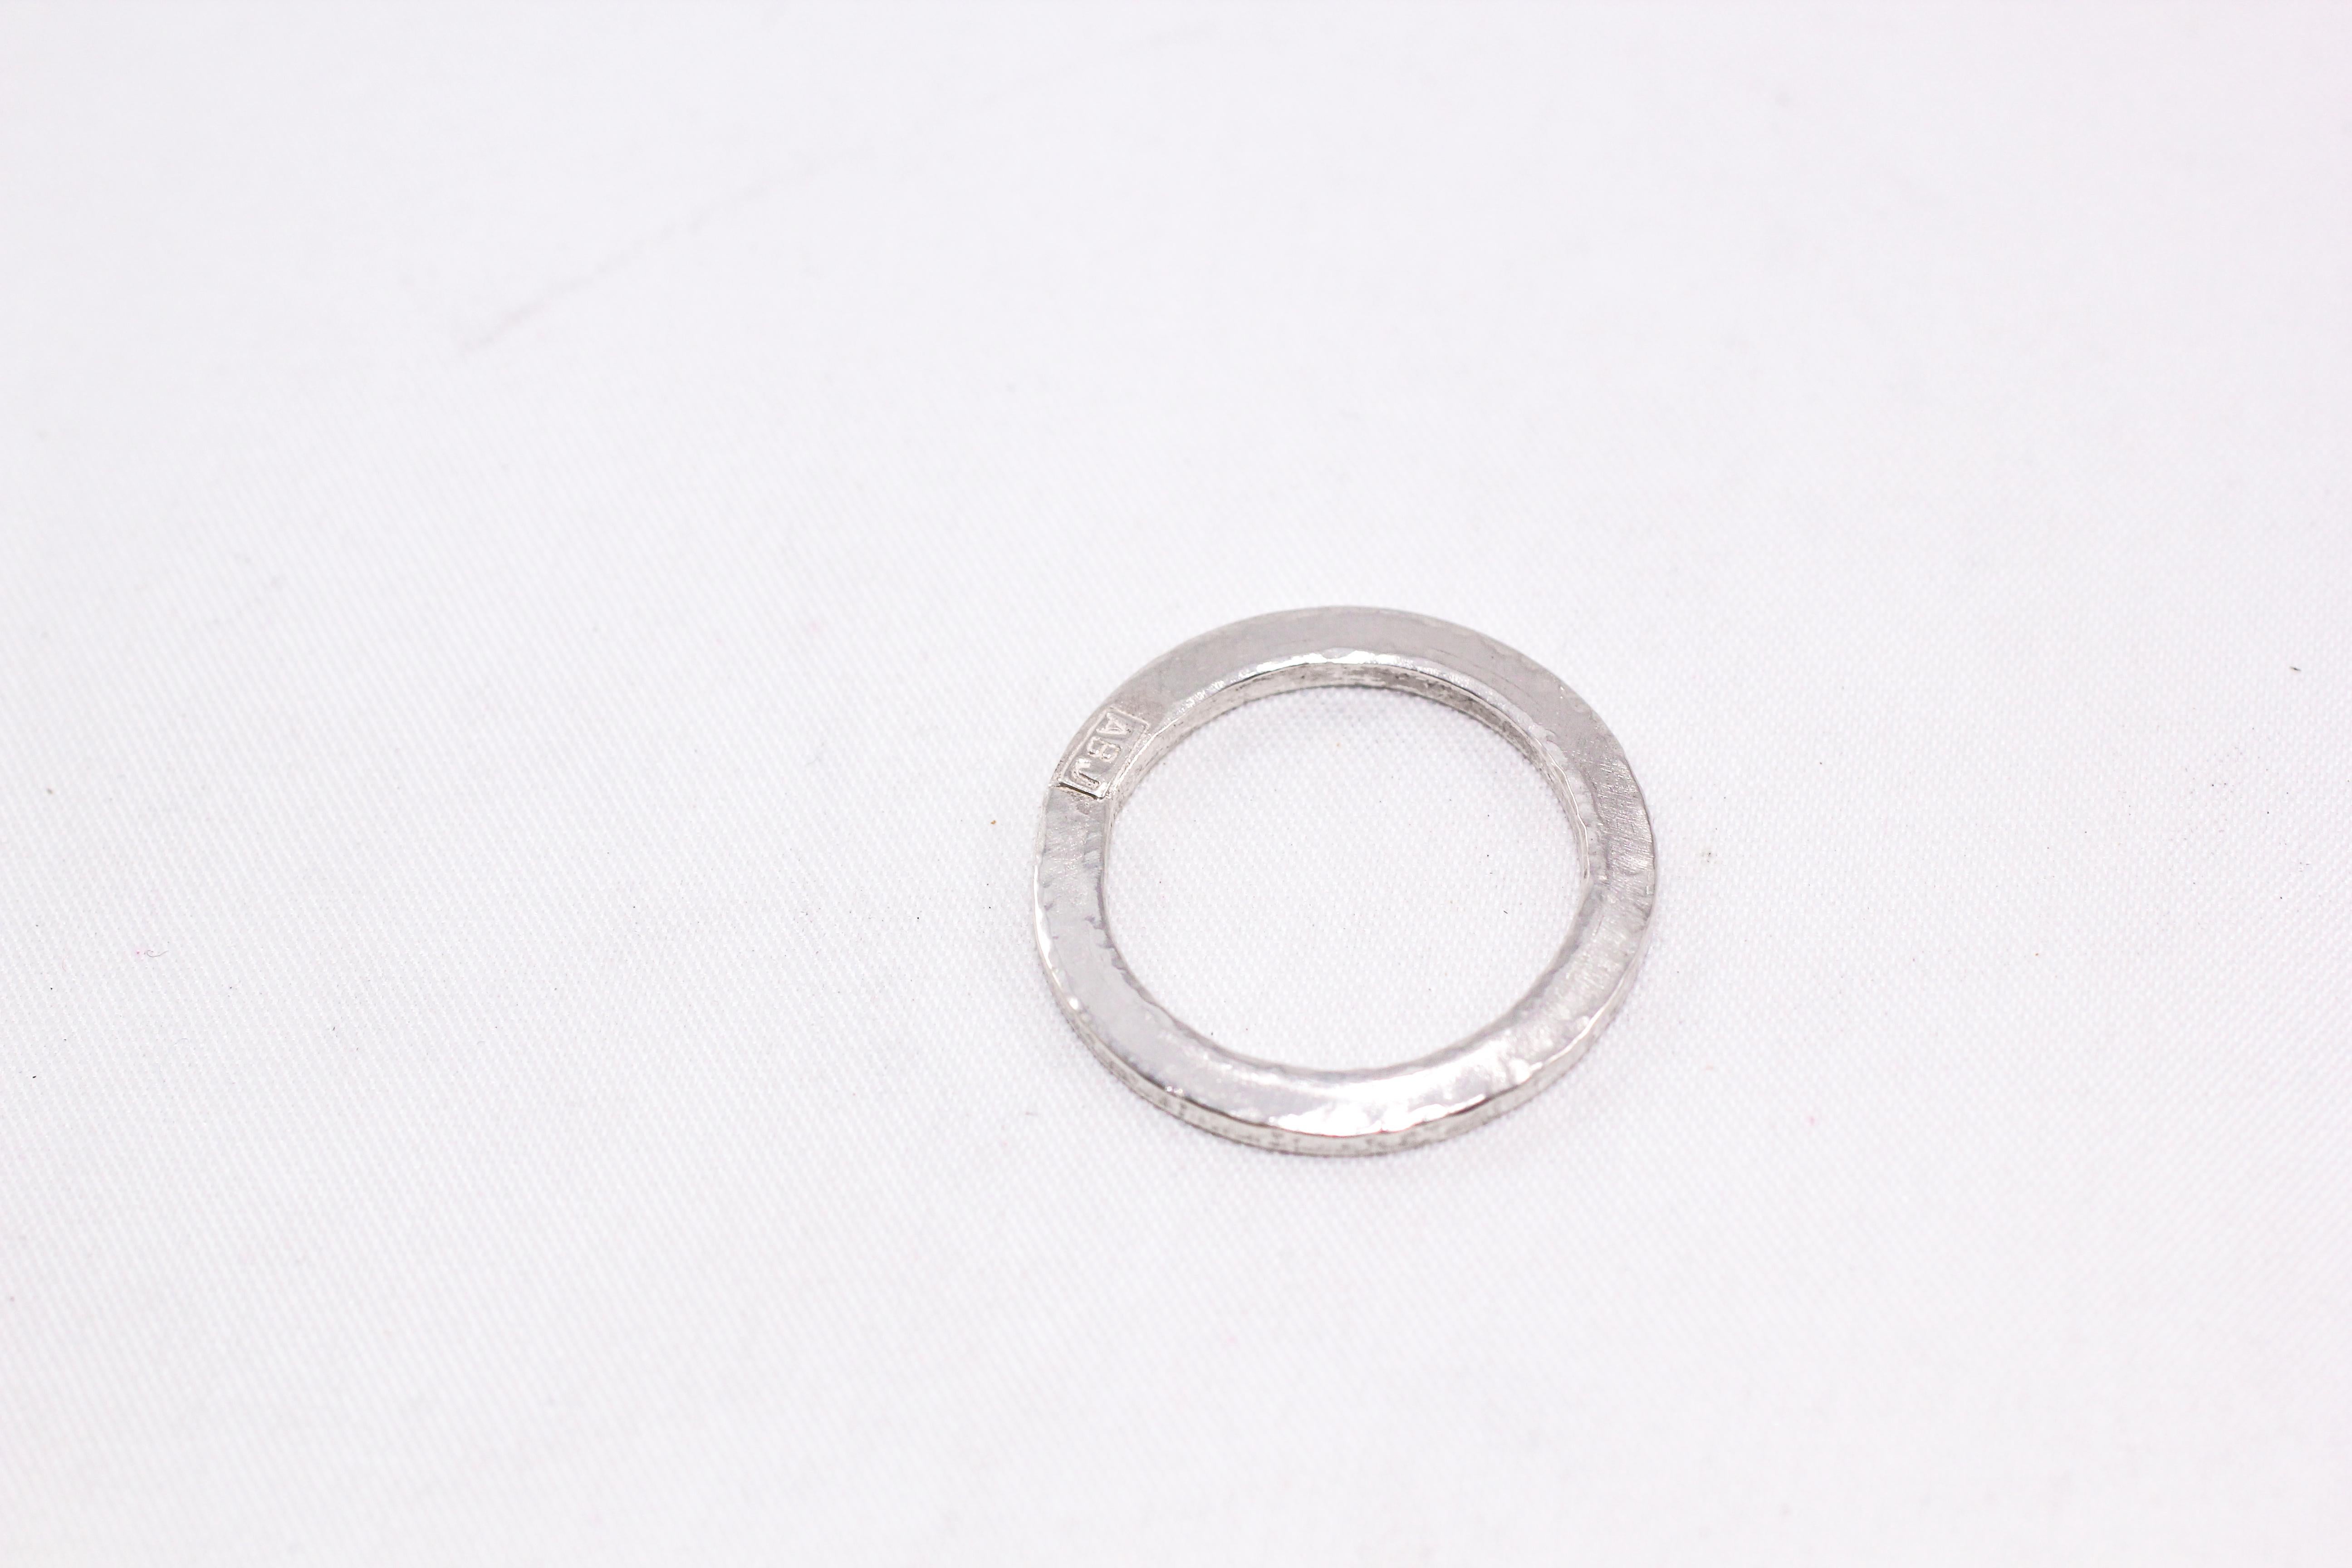 Simplicity Medium Disk contemporary unisex design- 
For sale here is Band Ring in platinum. Can be worn as a bridal or wedding ring or a stacking fashion ring. Great as a woman's or a man's ring.

Process: This striking ring is first hand-forged in